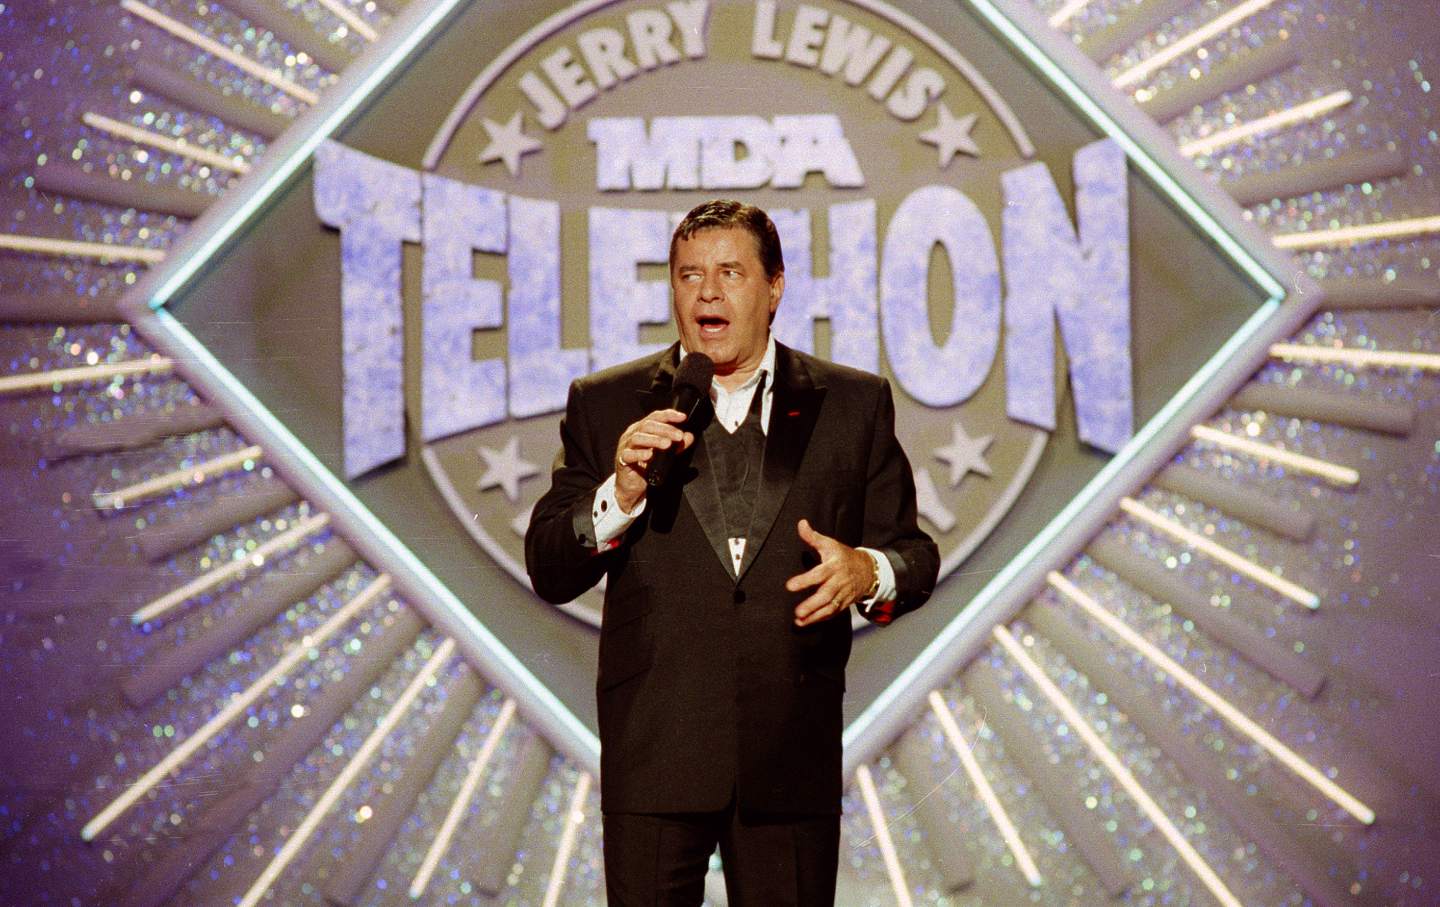 Jerry Lewis holding a microphone